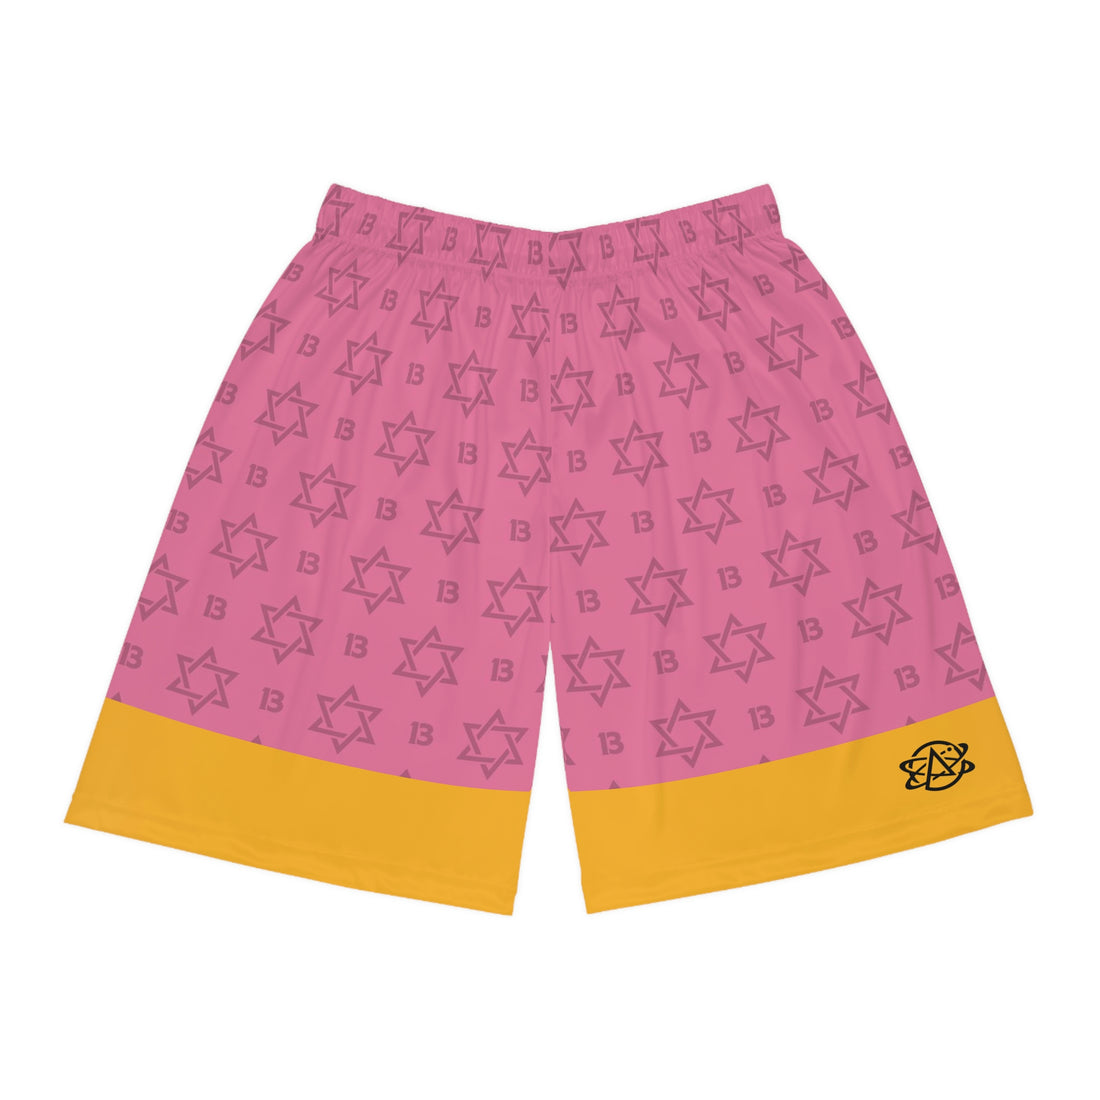 Father Yod's Team Pink Shorts